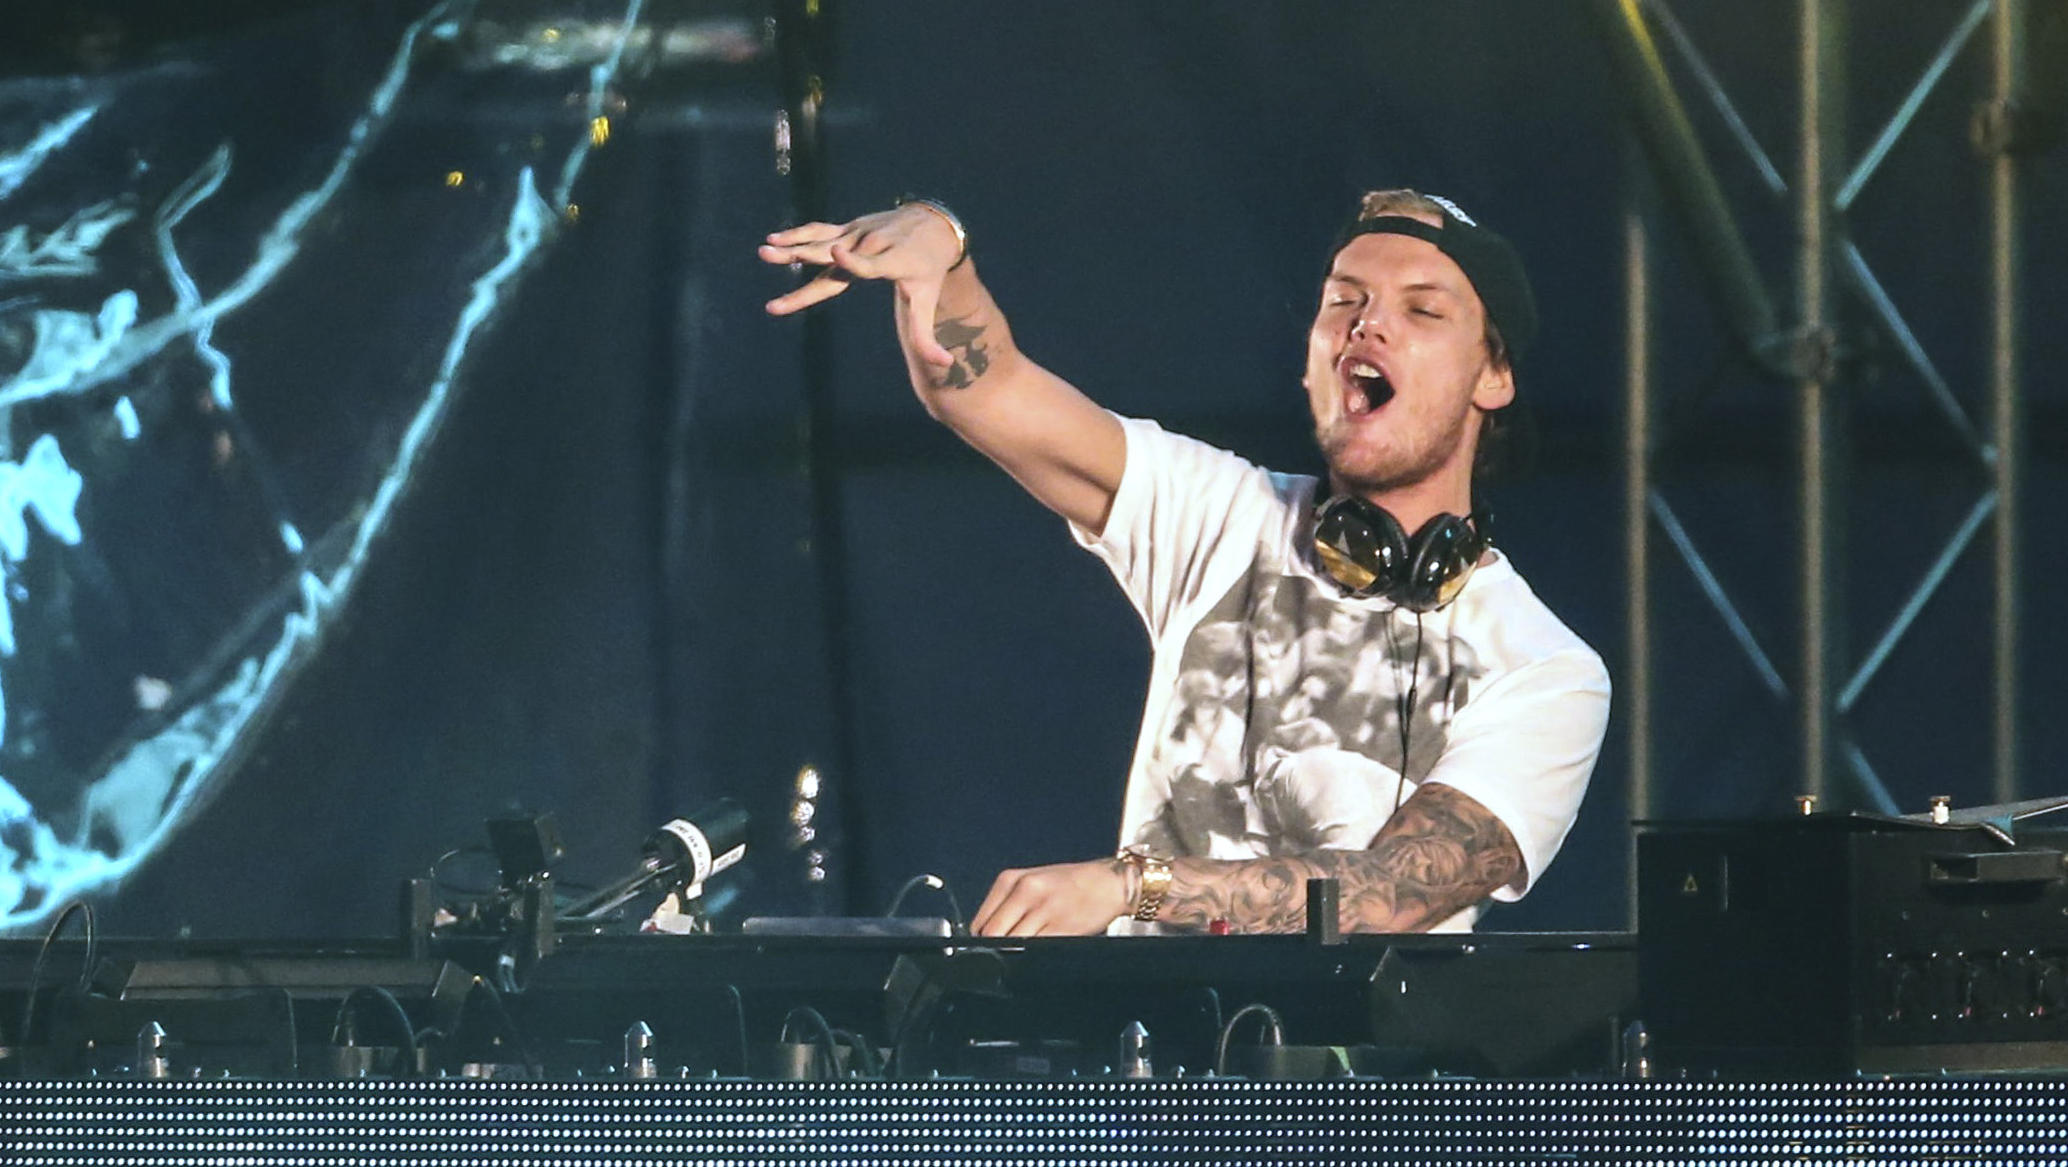 Famed+DJ+Avicii+was+like+a+%26%238216%3Bzombie%26%238217%3B+at+the+end+of+his+life+and+used+his+lyrics+as+a+cry+for+help+after+struggling+with+drugs+and+alcohol%2C+new+doc+reveals